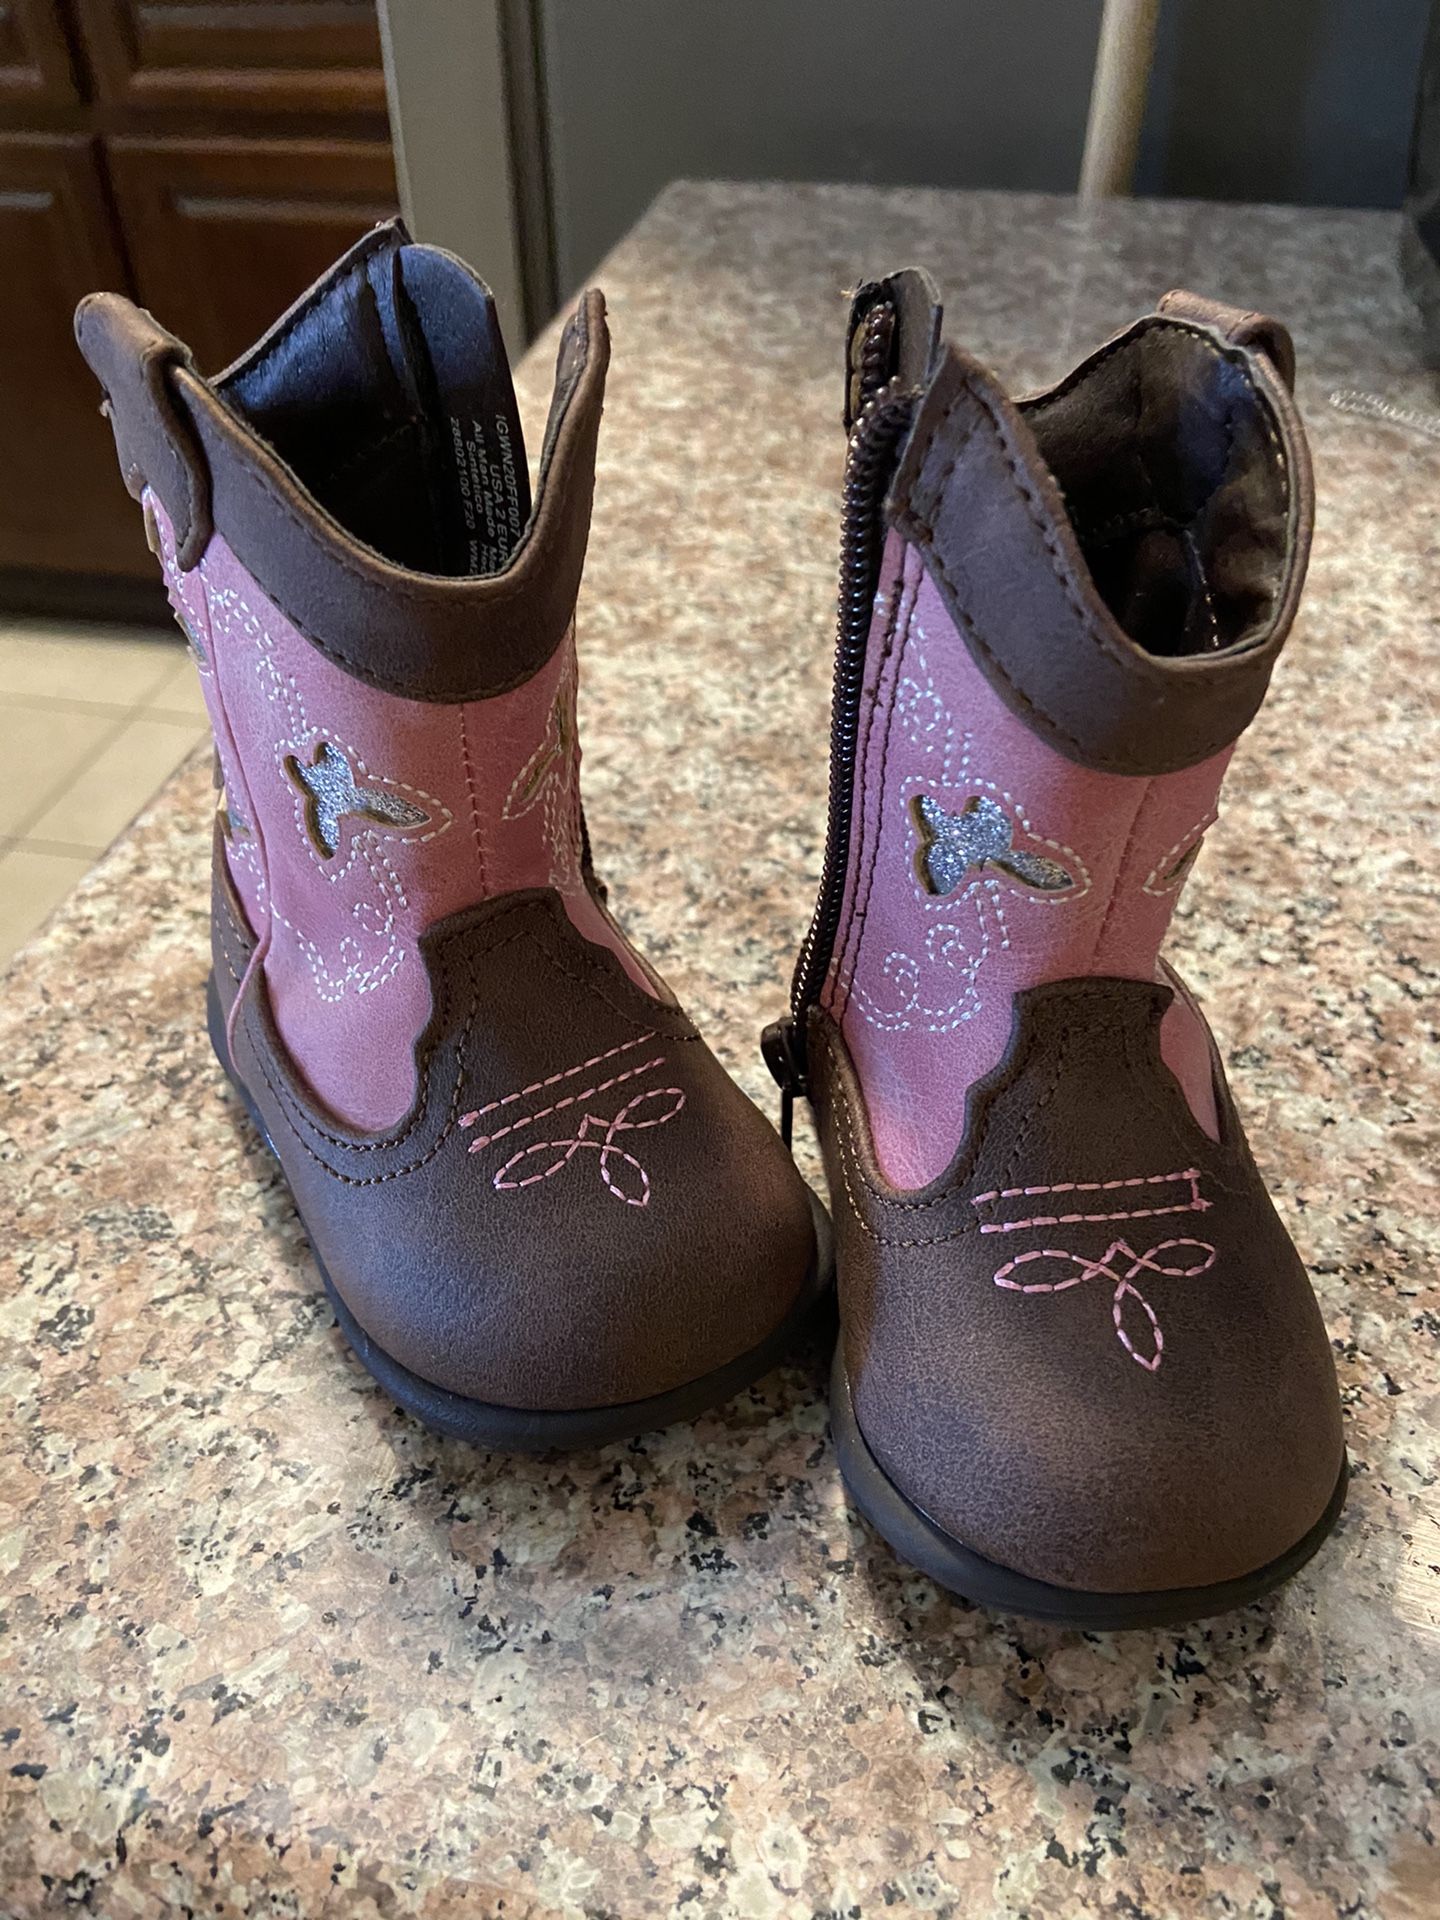 New Baby Boots